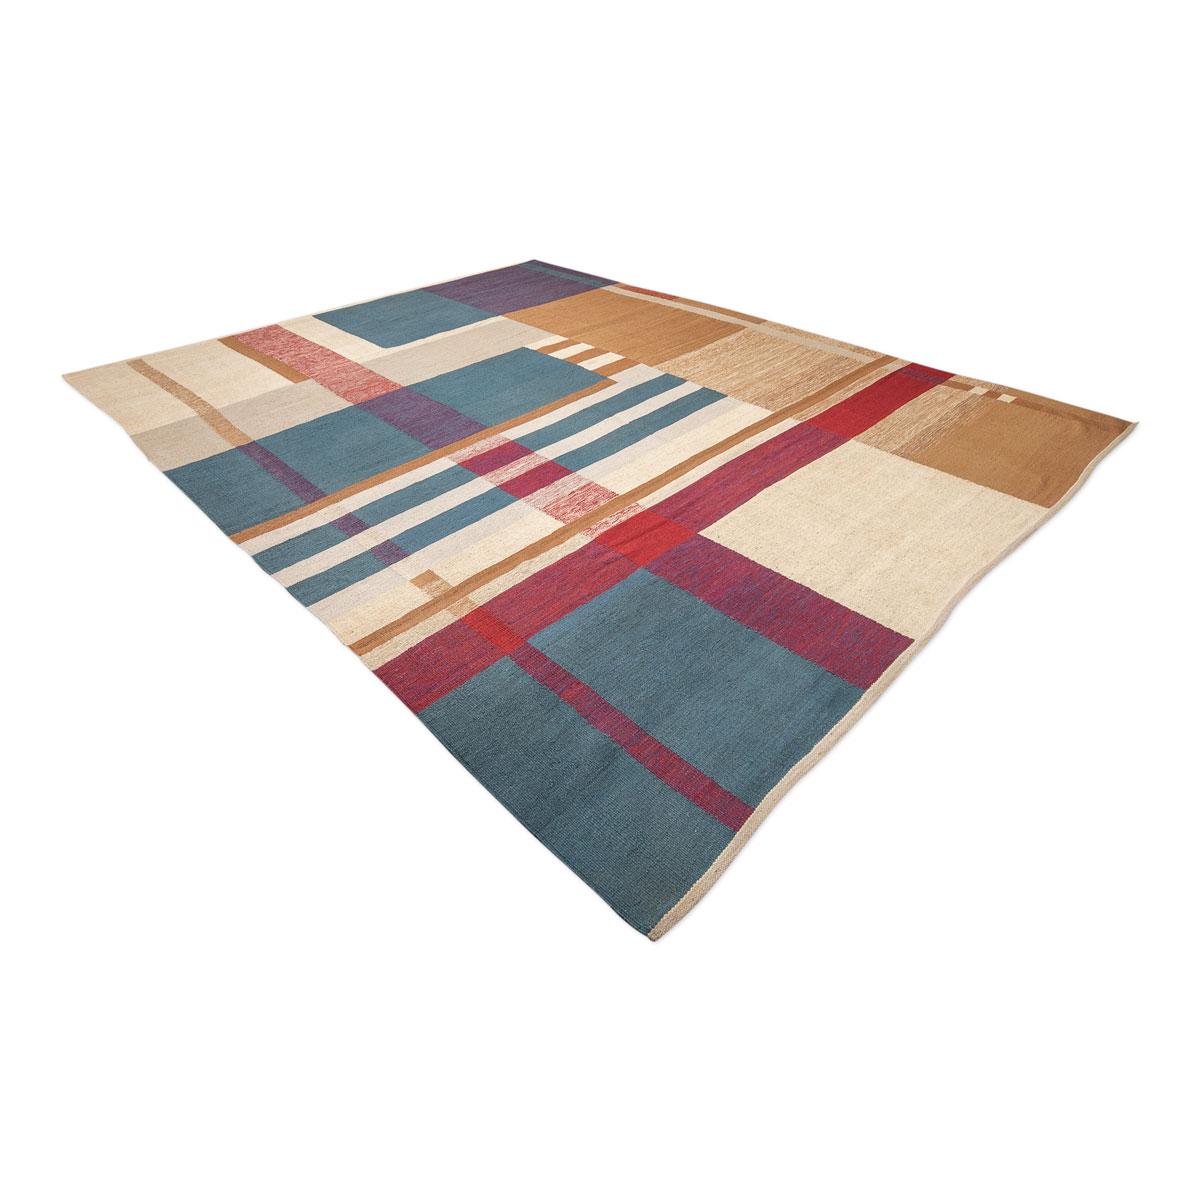 Contemporary Kilim crafted with aged wool
- Its color is defined by its originality in beige, blue, gray and earth colors in various ranges
- Its design with no borders will focus perfectly on a decorative environment
- Our customers love this